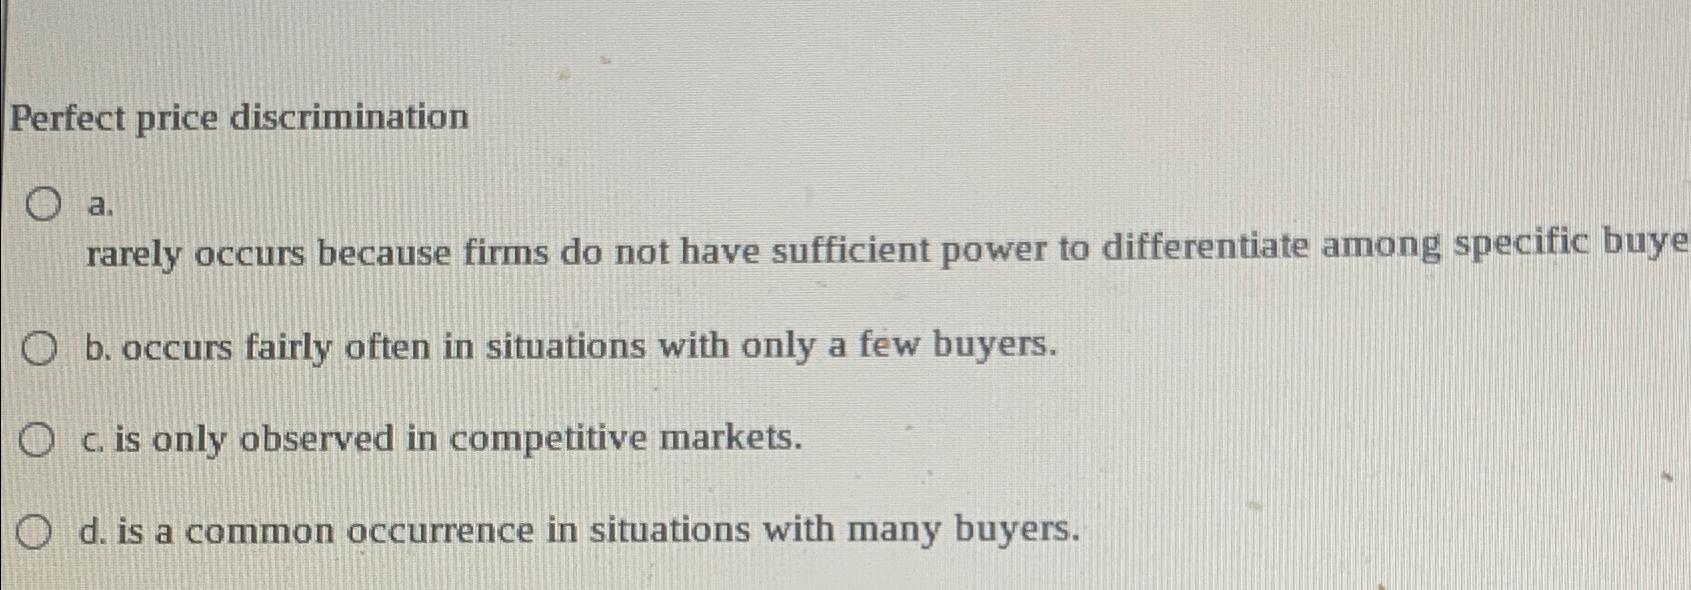 Perfect price discrimination a. rarely occurs because firms do not have sufficient power to differentiate